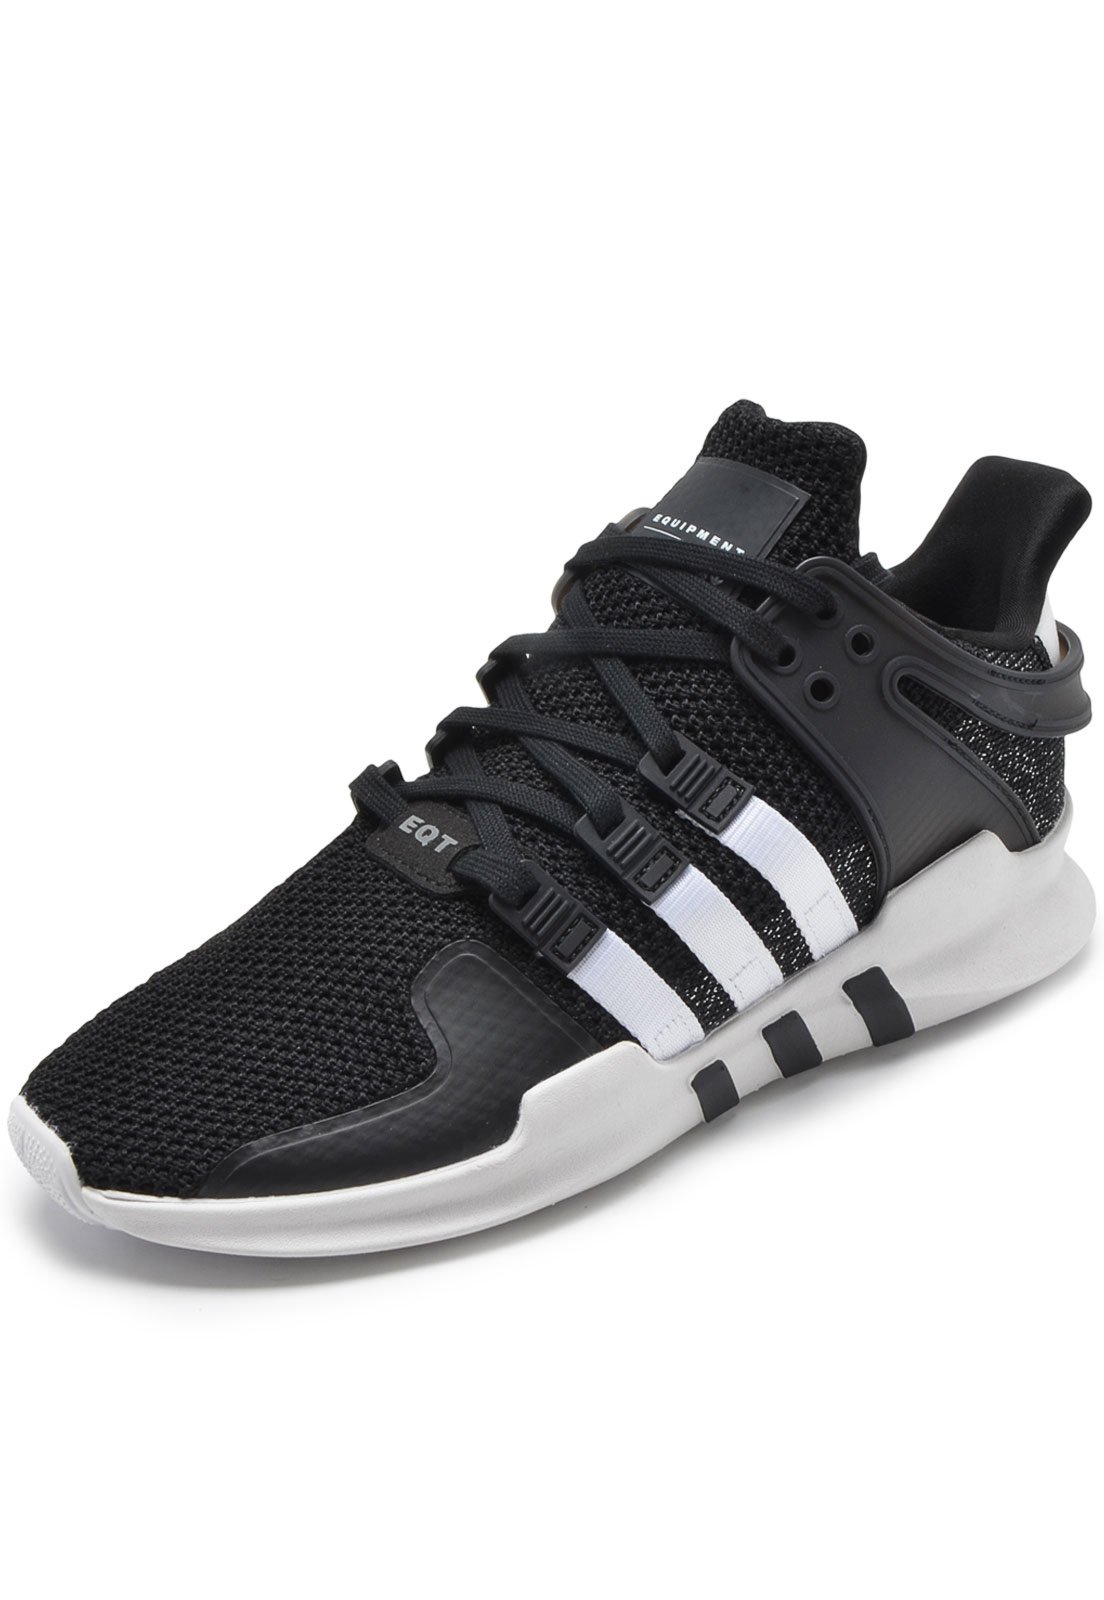 Tenis Adidas Masculino Eqt Support Adv Casual Flash Sales 60 Off Www Beckers Bester De